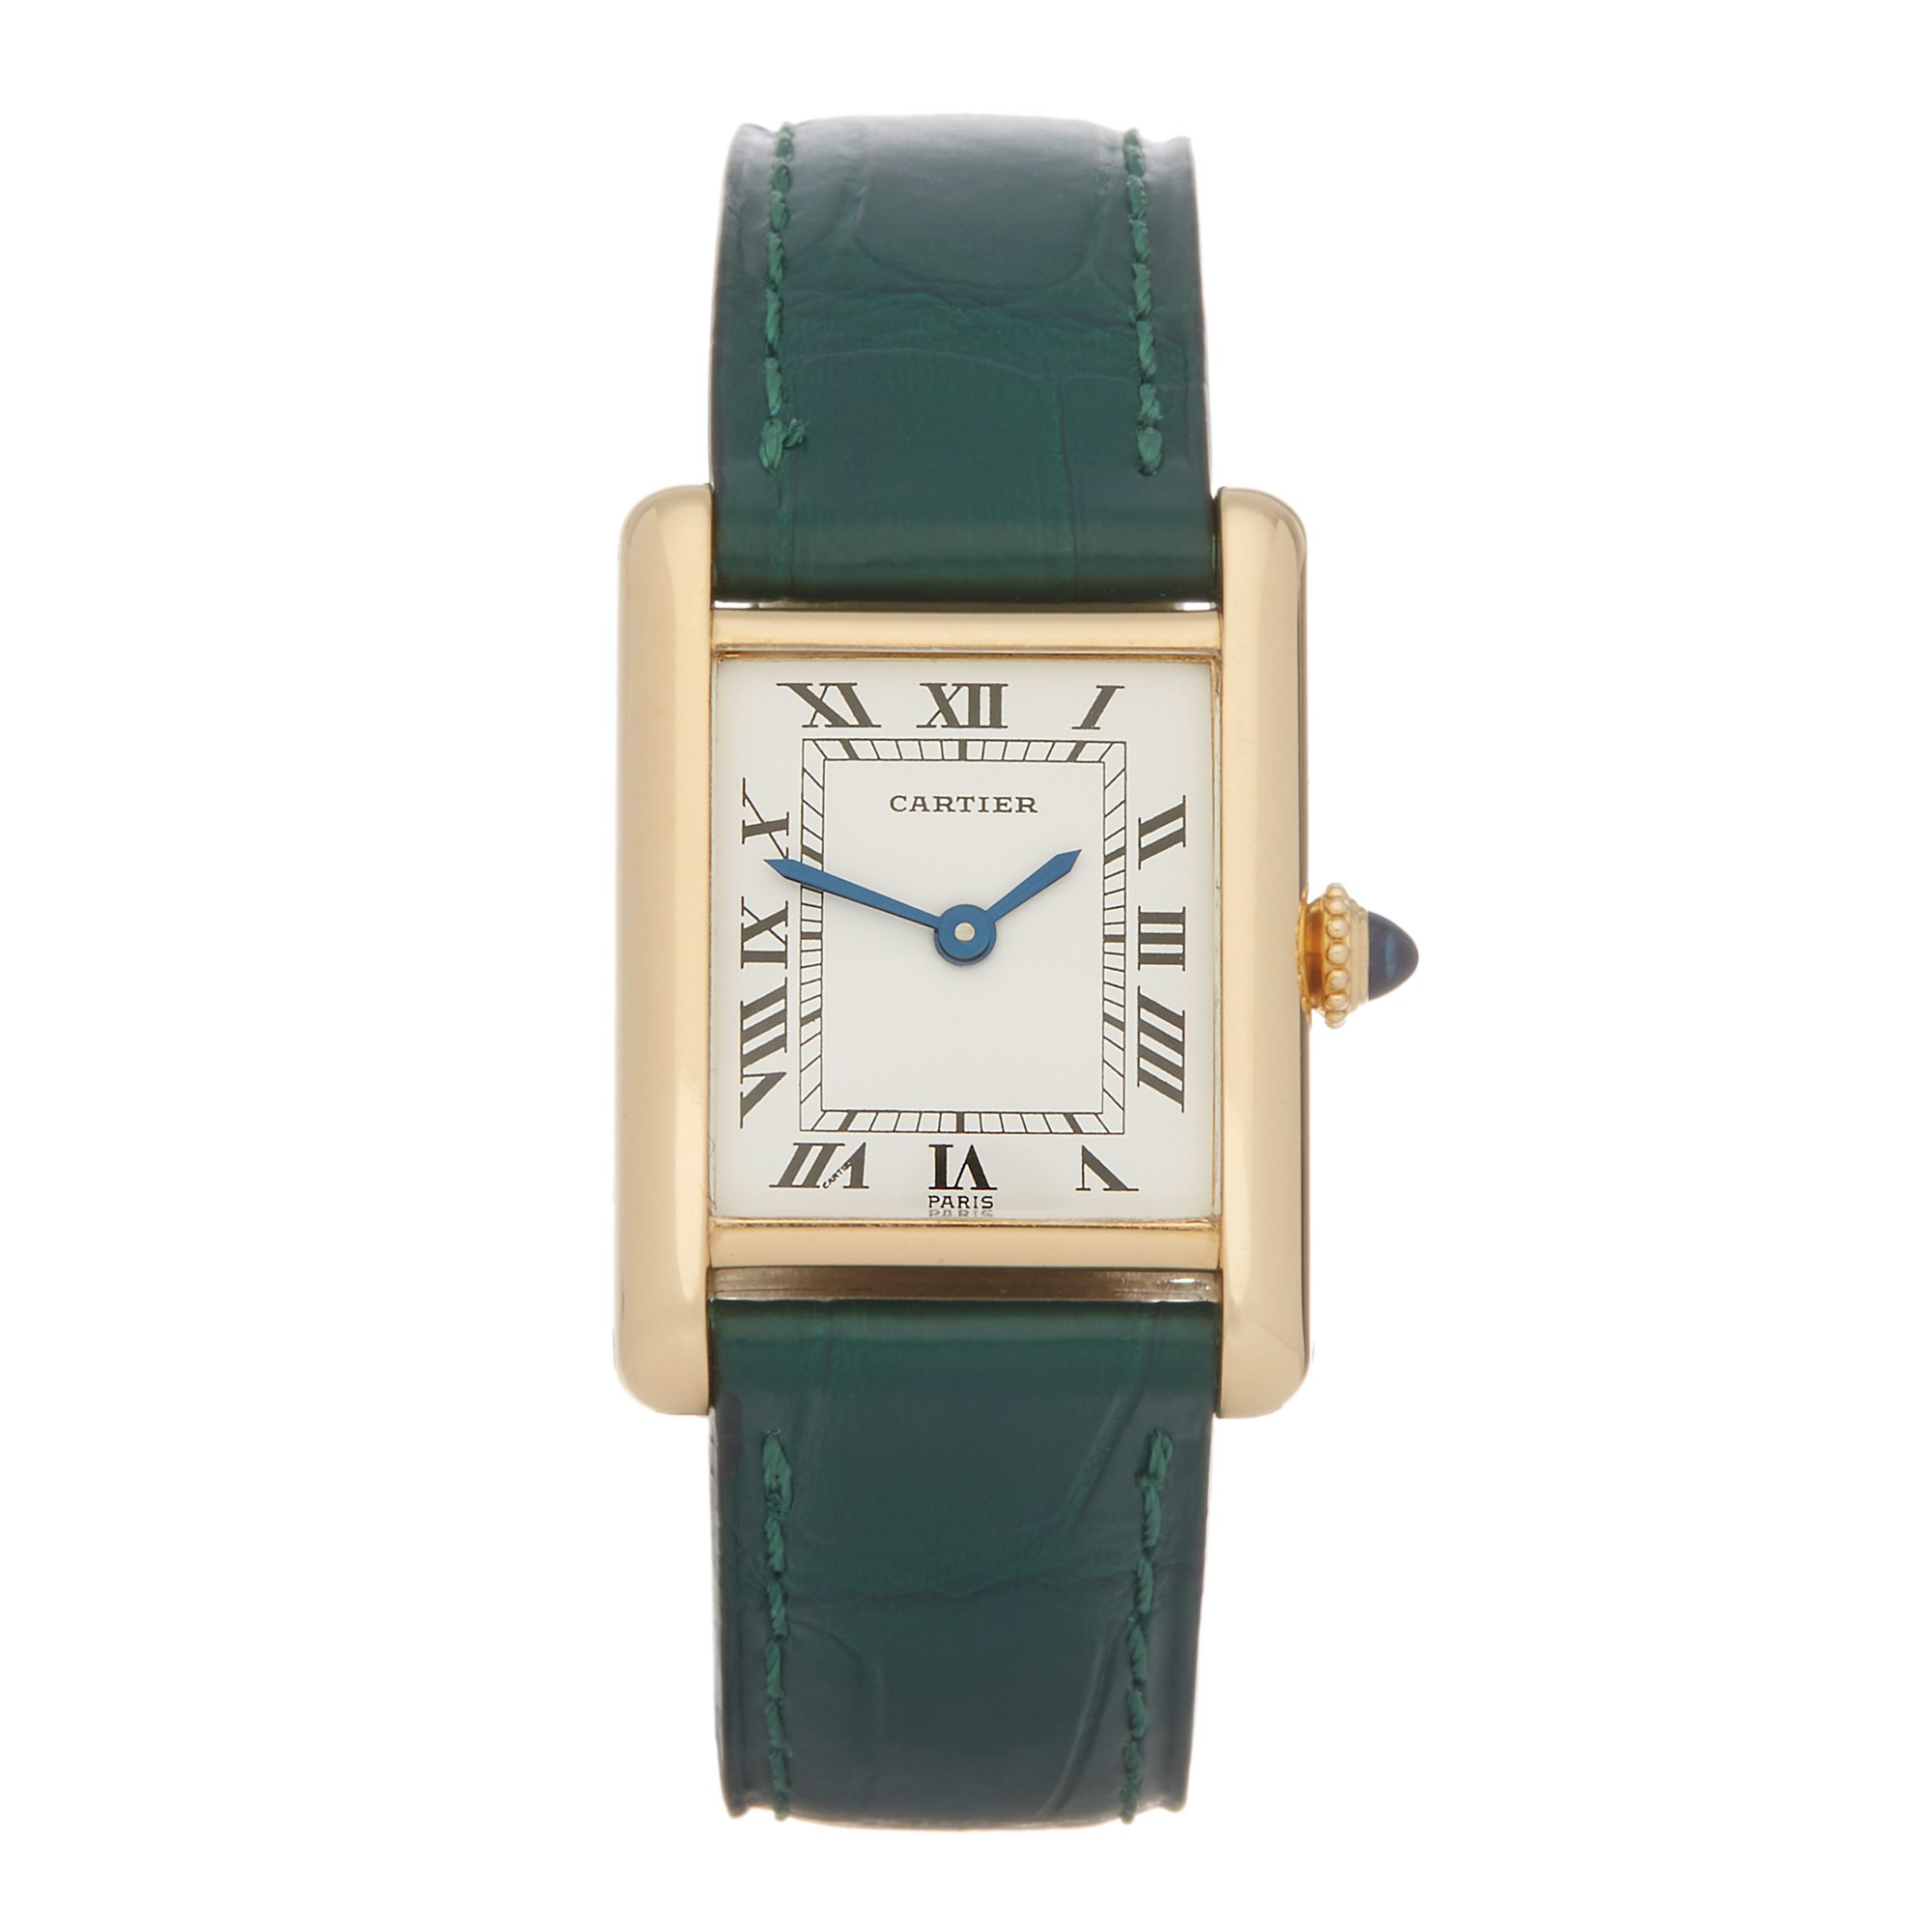 Cartier Tank 82720500 or 1610 1990's 